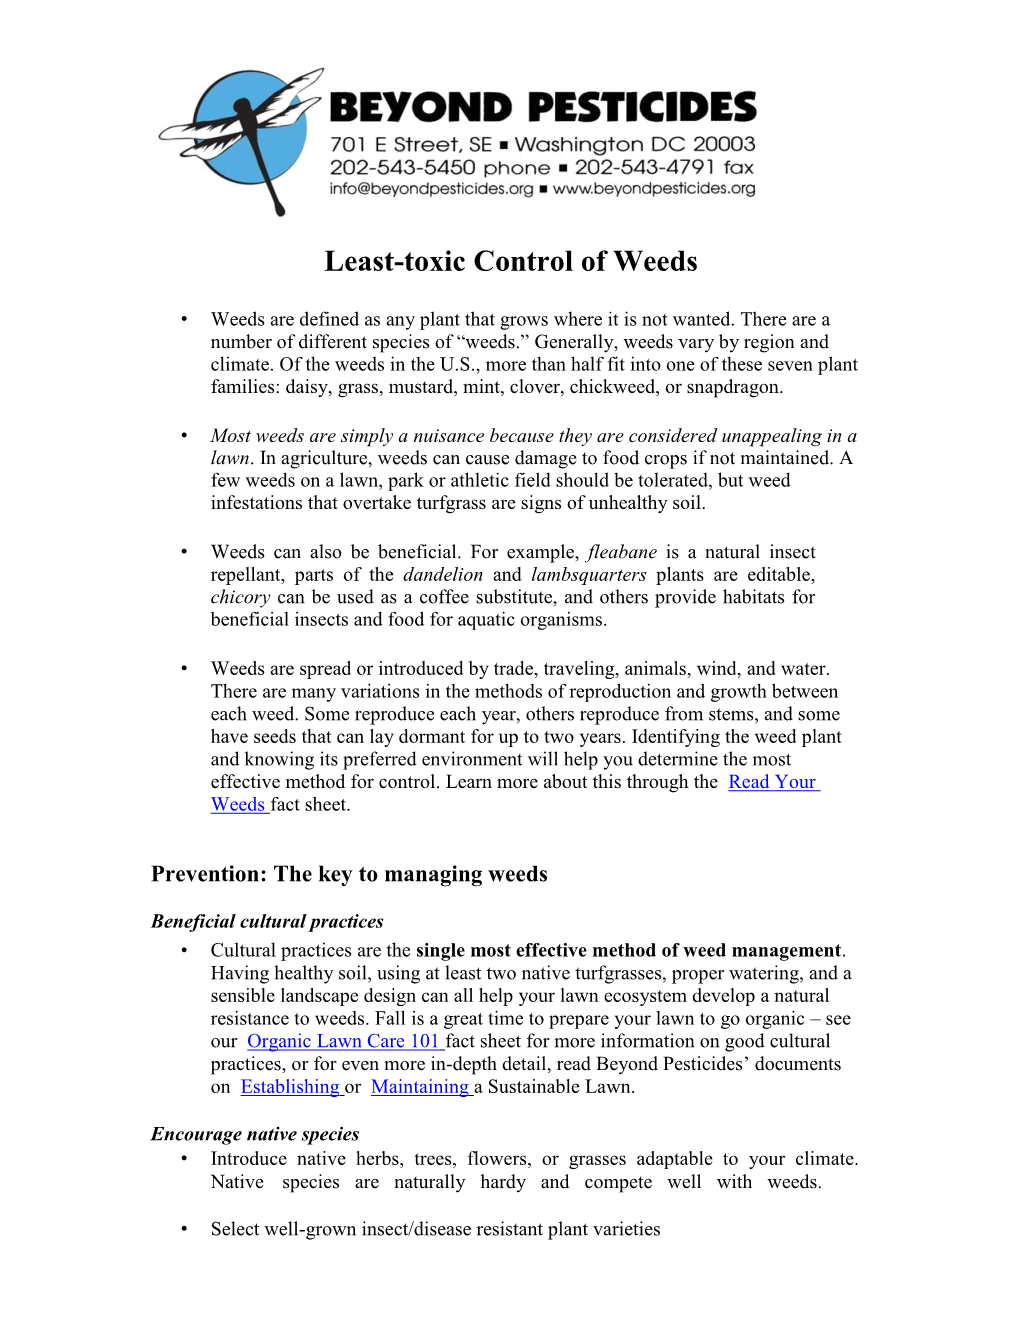 Least-Toxic Control of Weeds